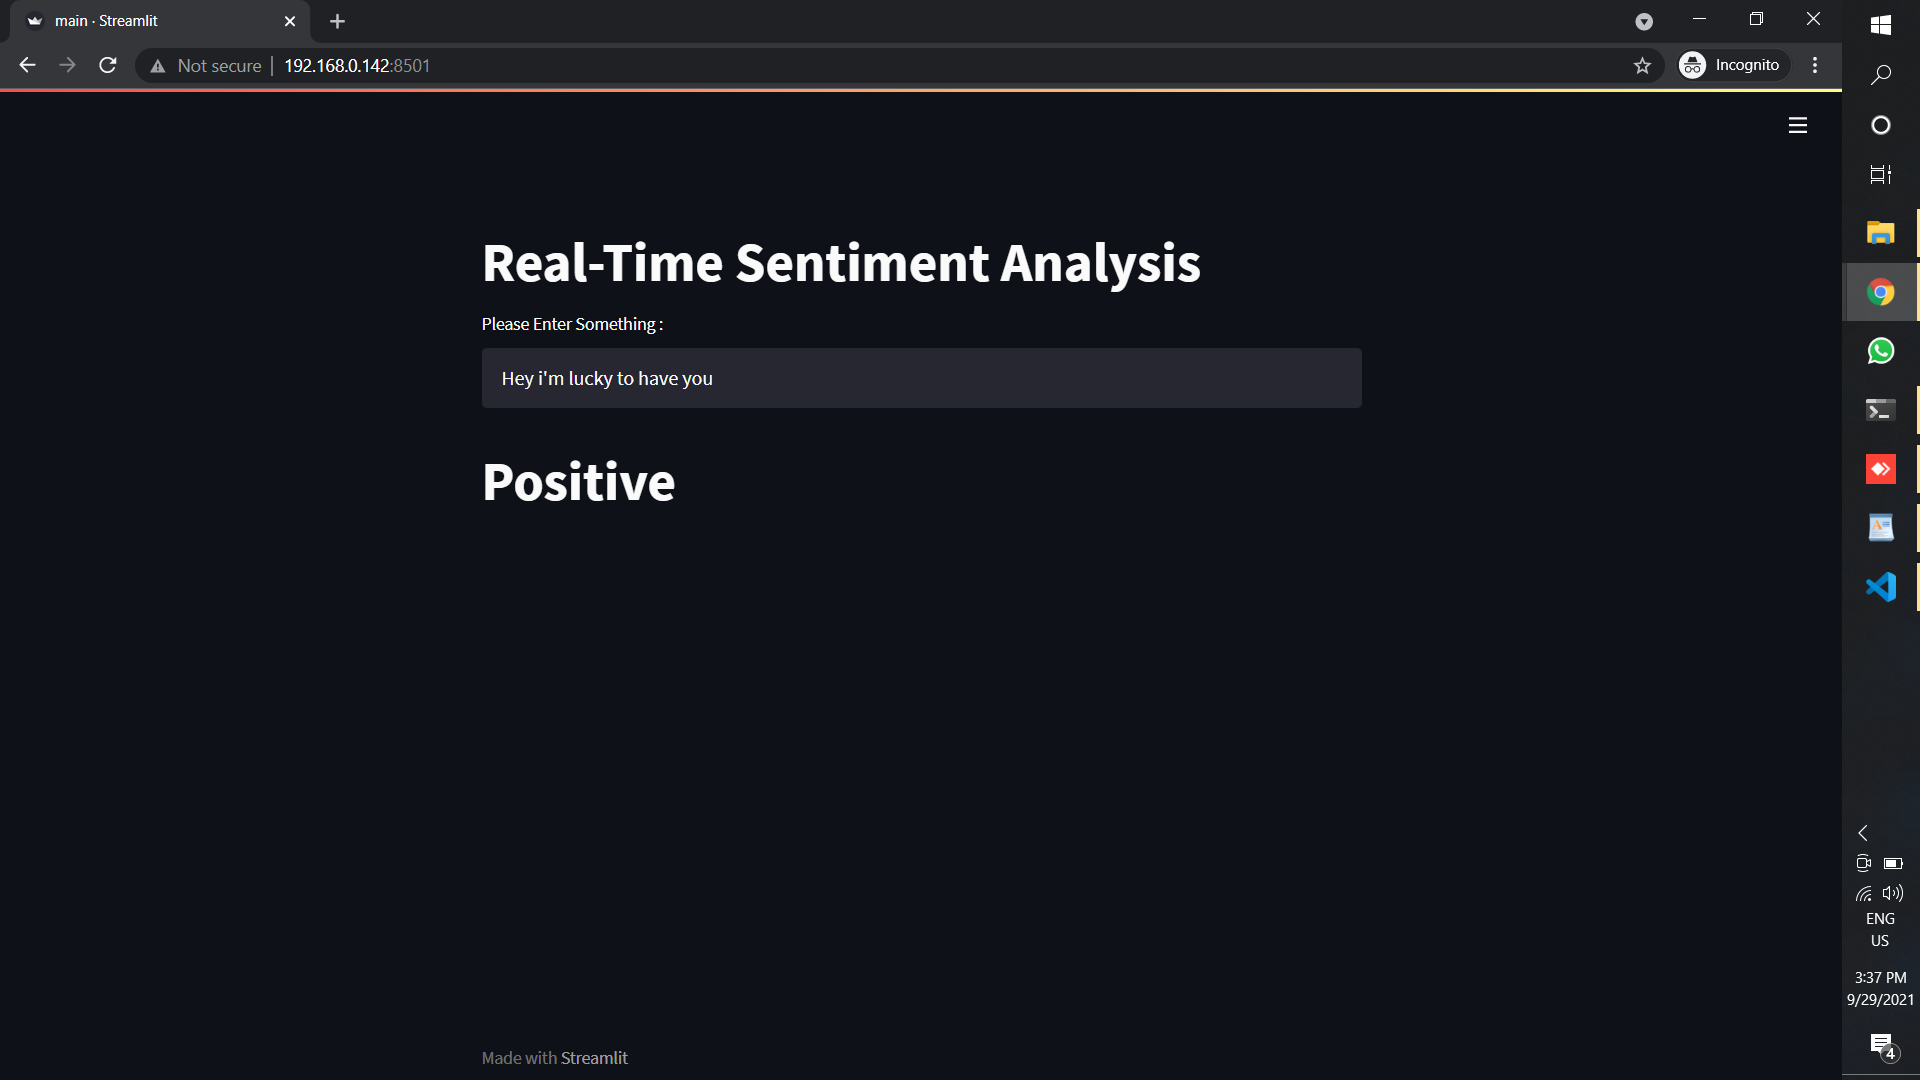 Real-Time Sentiment Analysis Project Using Python